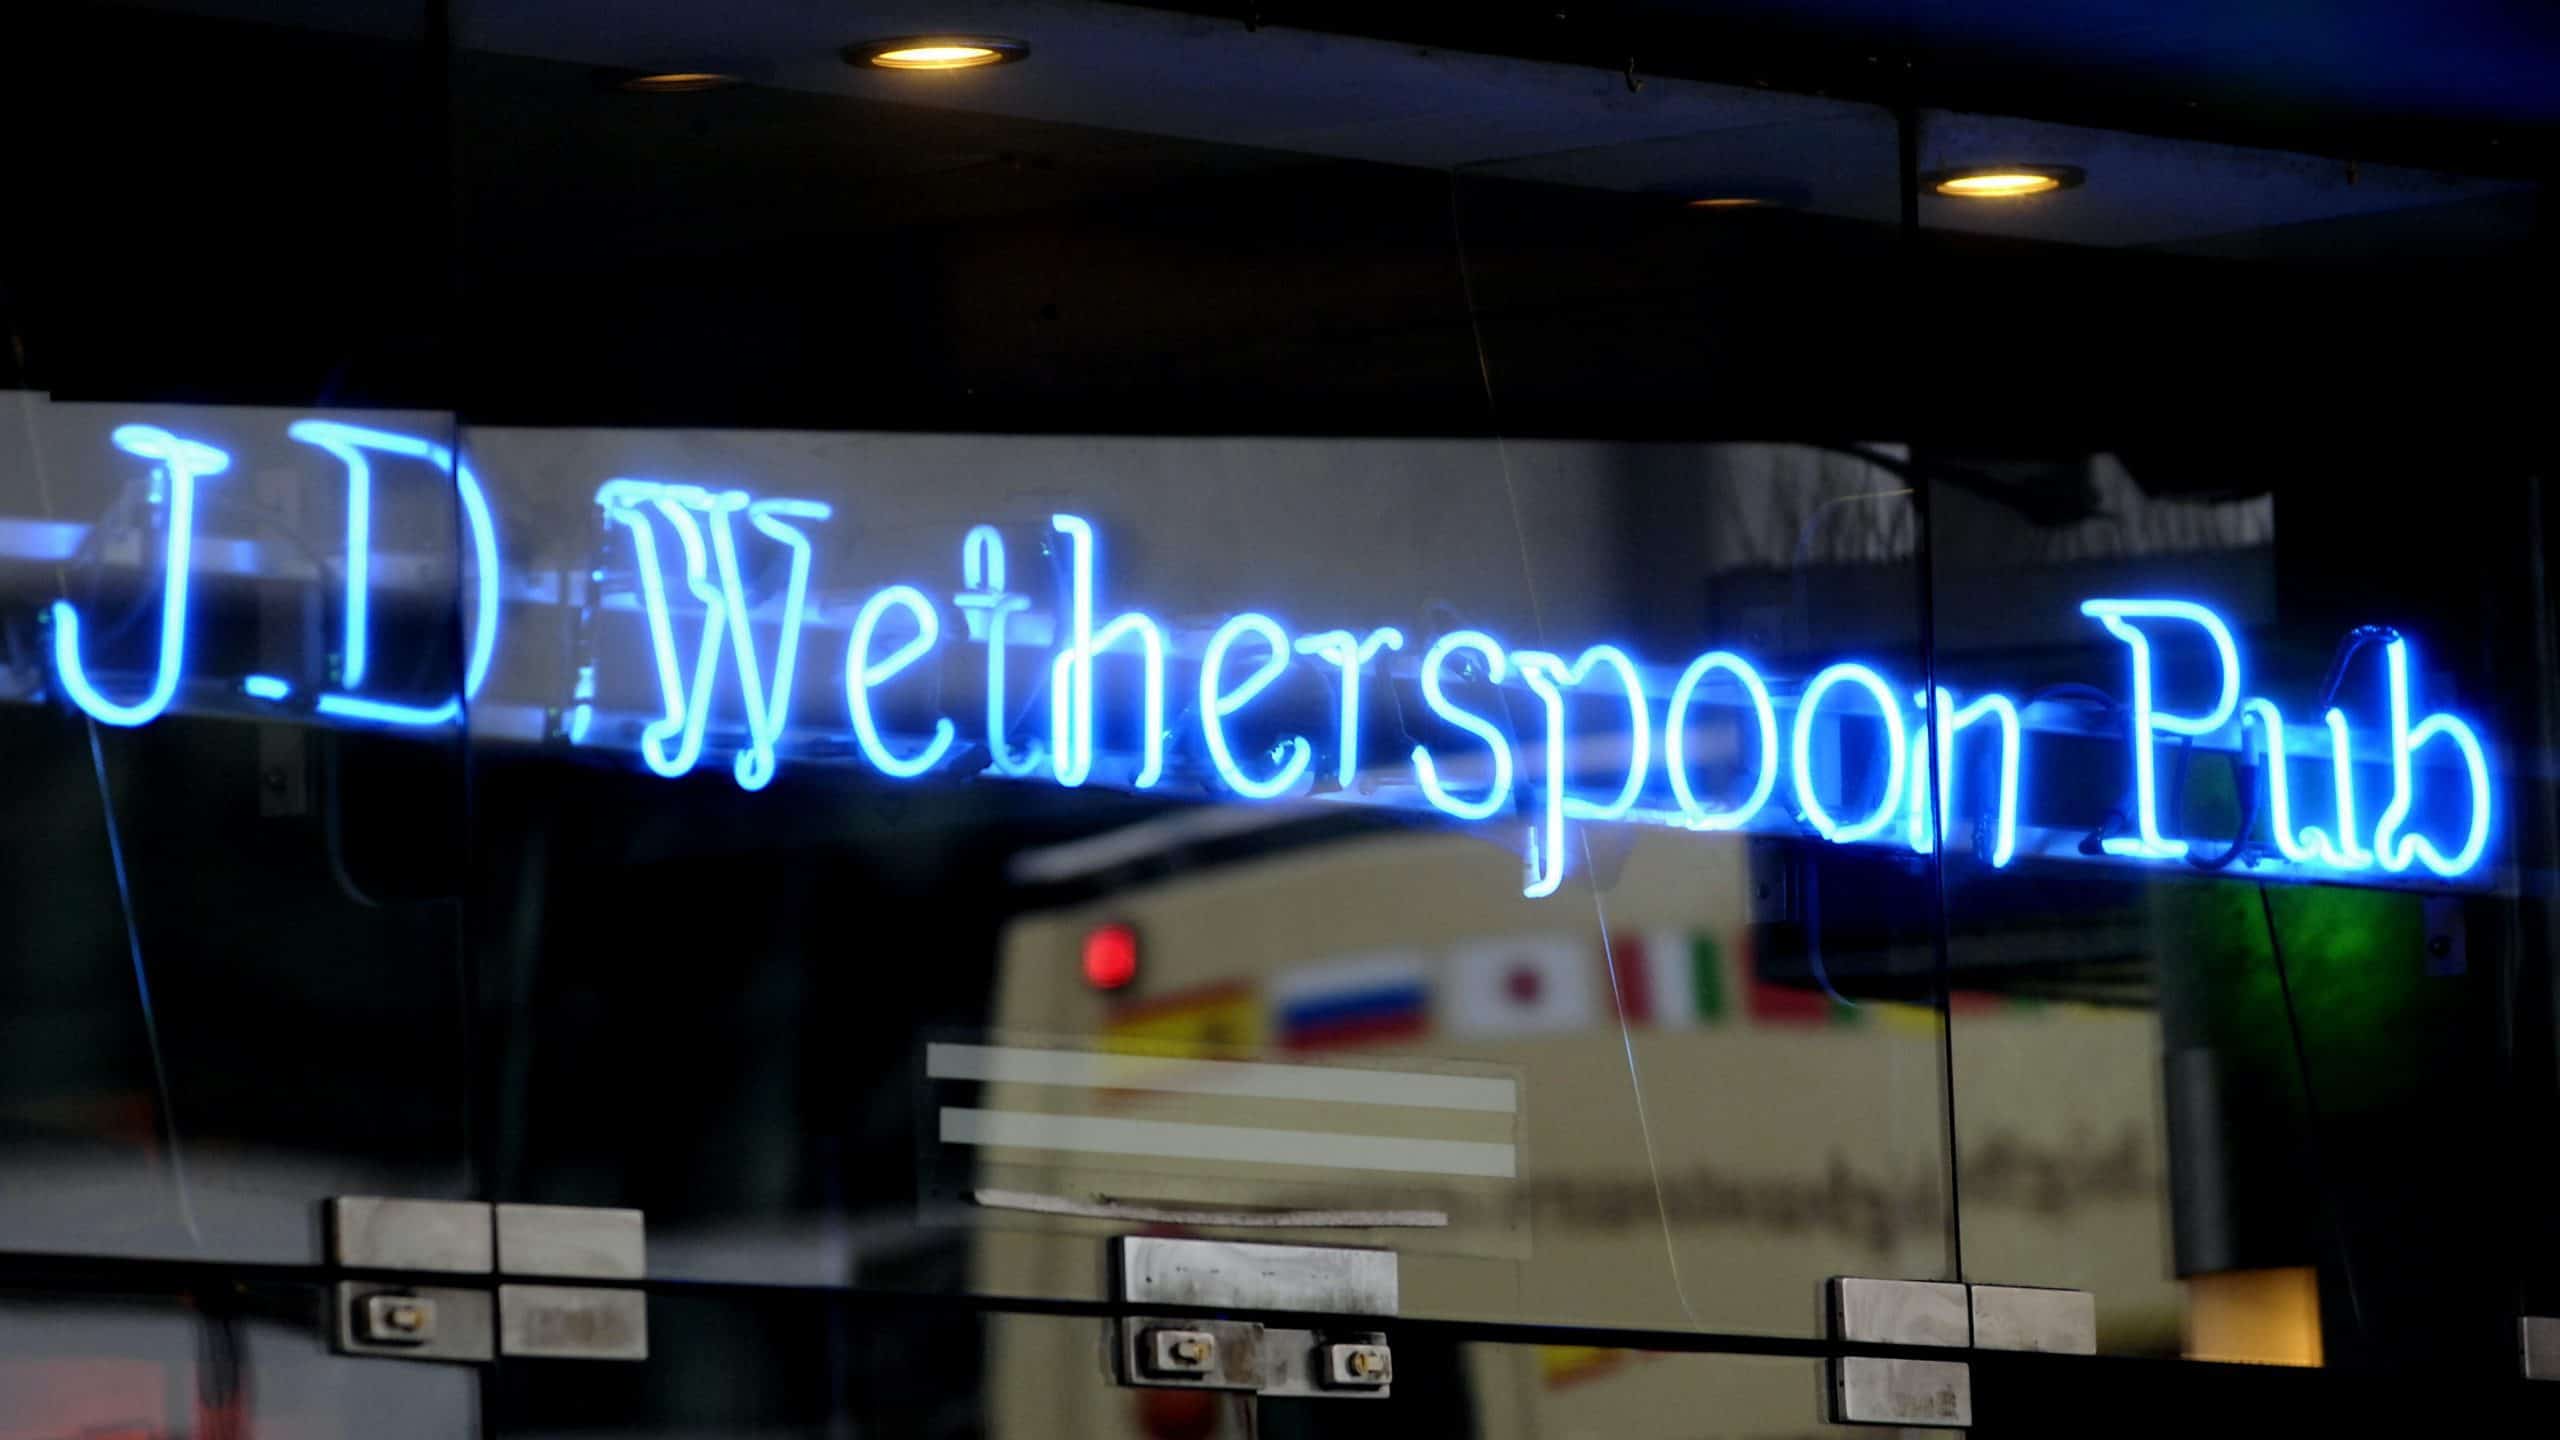 Wetherspoons forced to source eggs from Europe as pub chain is beset by supply chain issues